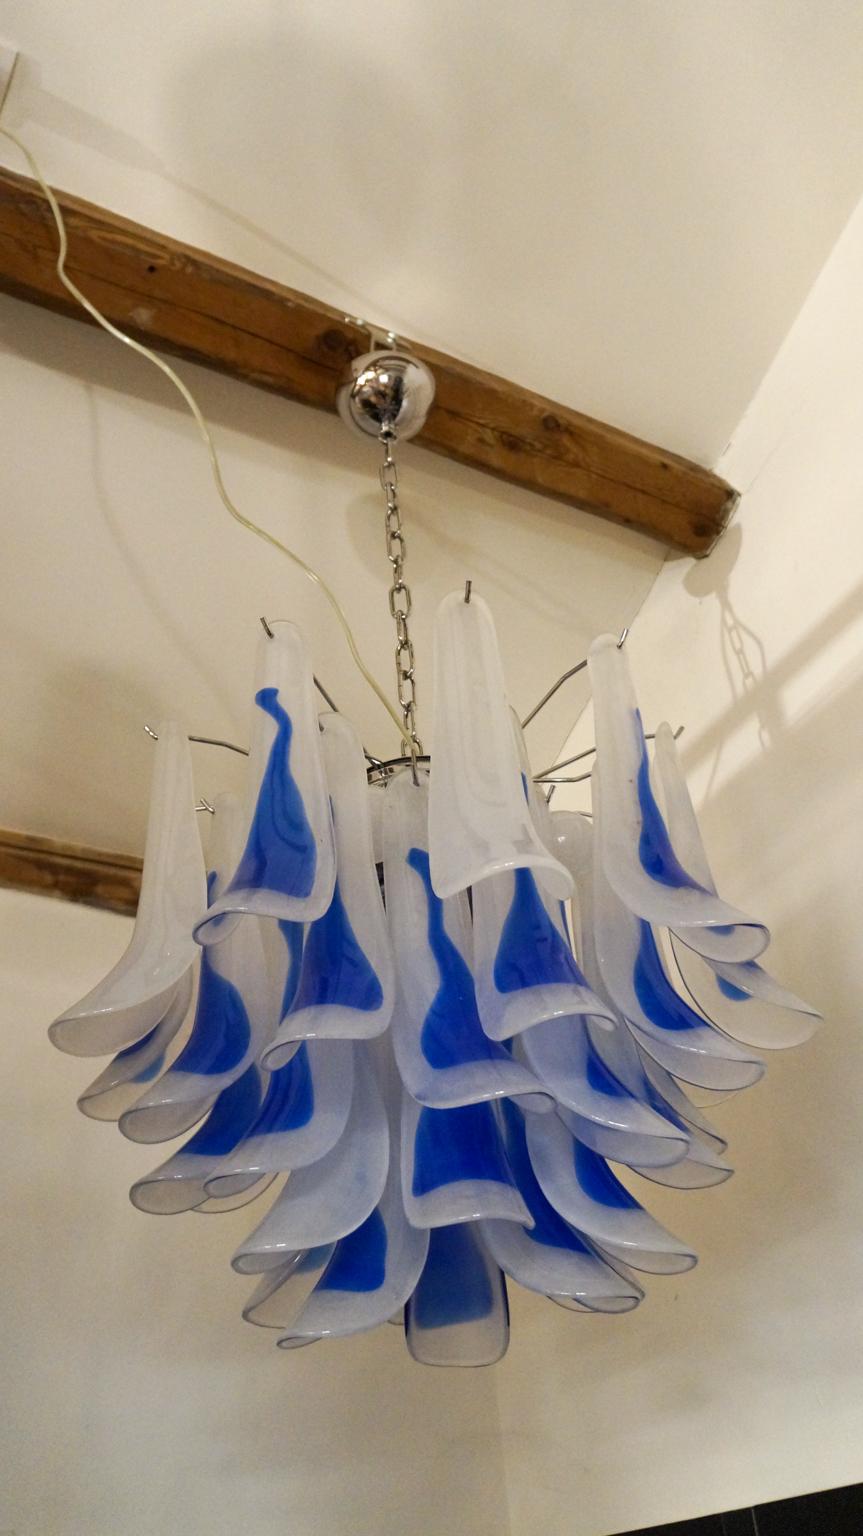 Alberto Donà Mid-Century Modern Crystal Blue Murano Glass Selle Chandelier, 1992 For Sale 14